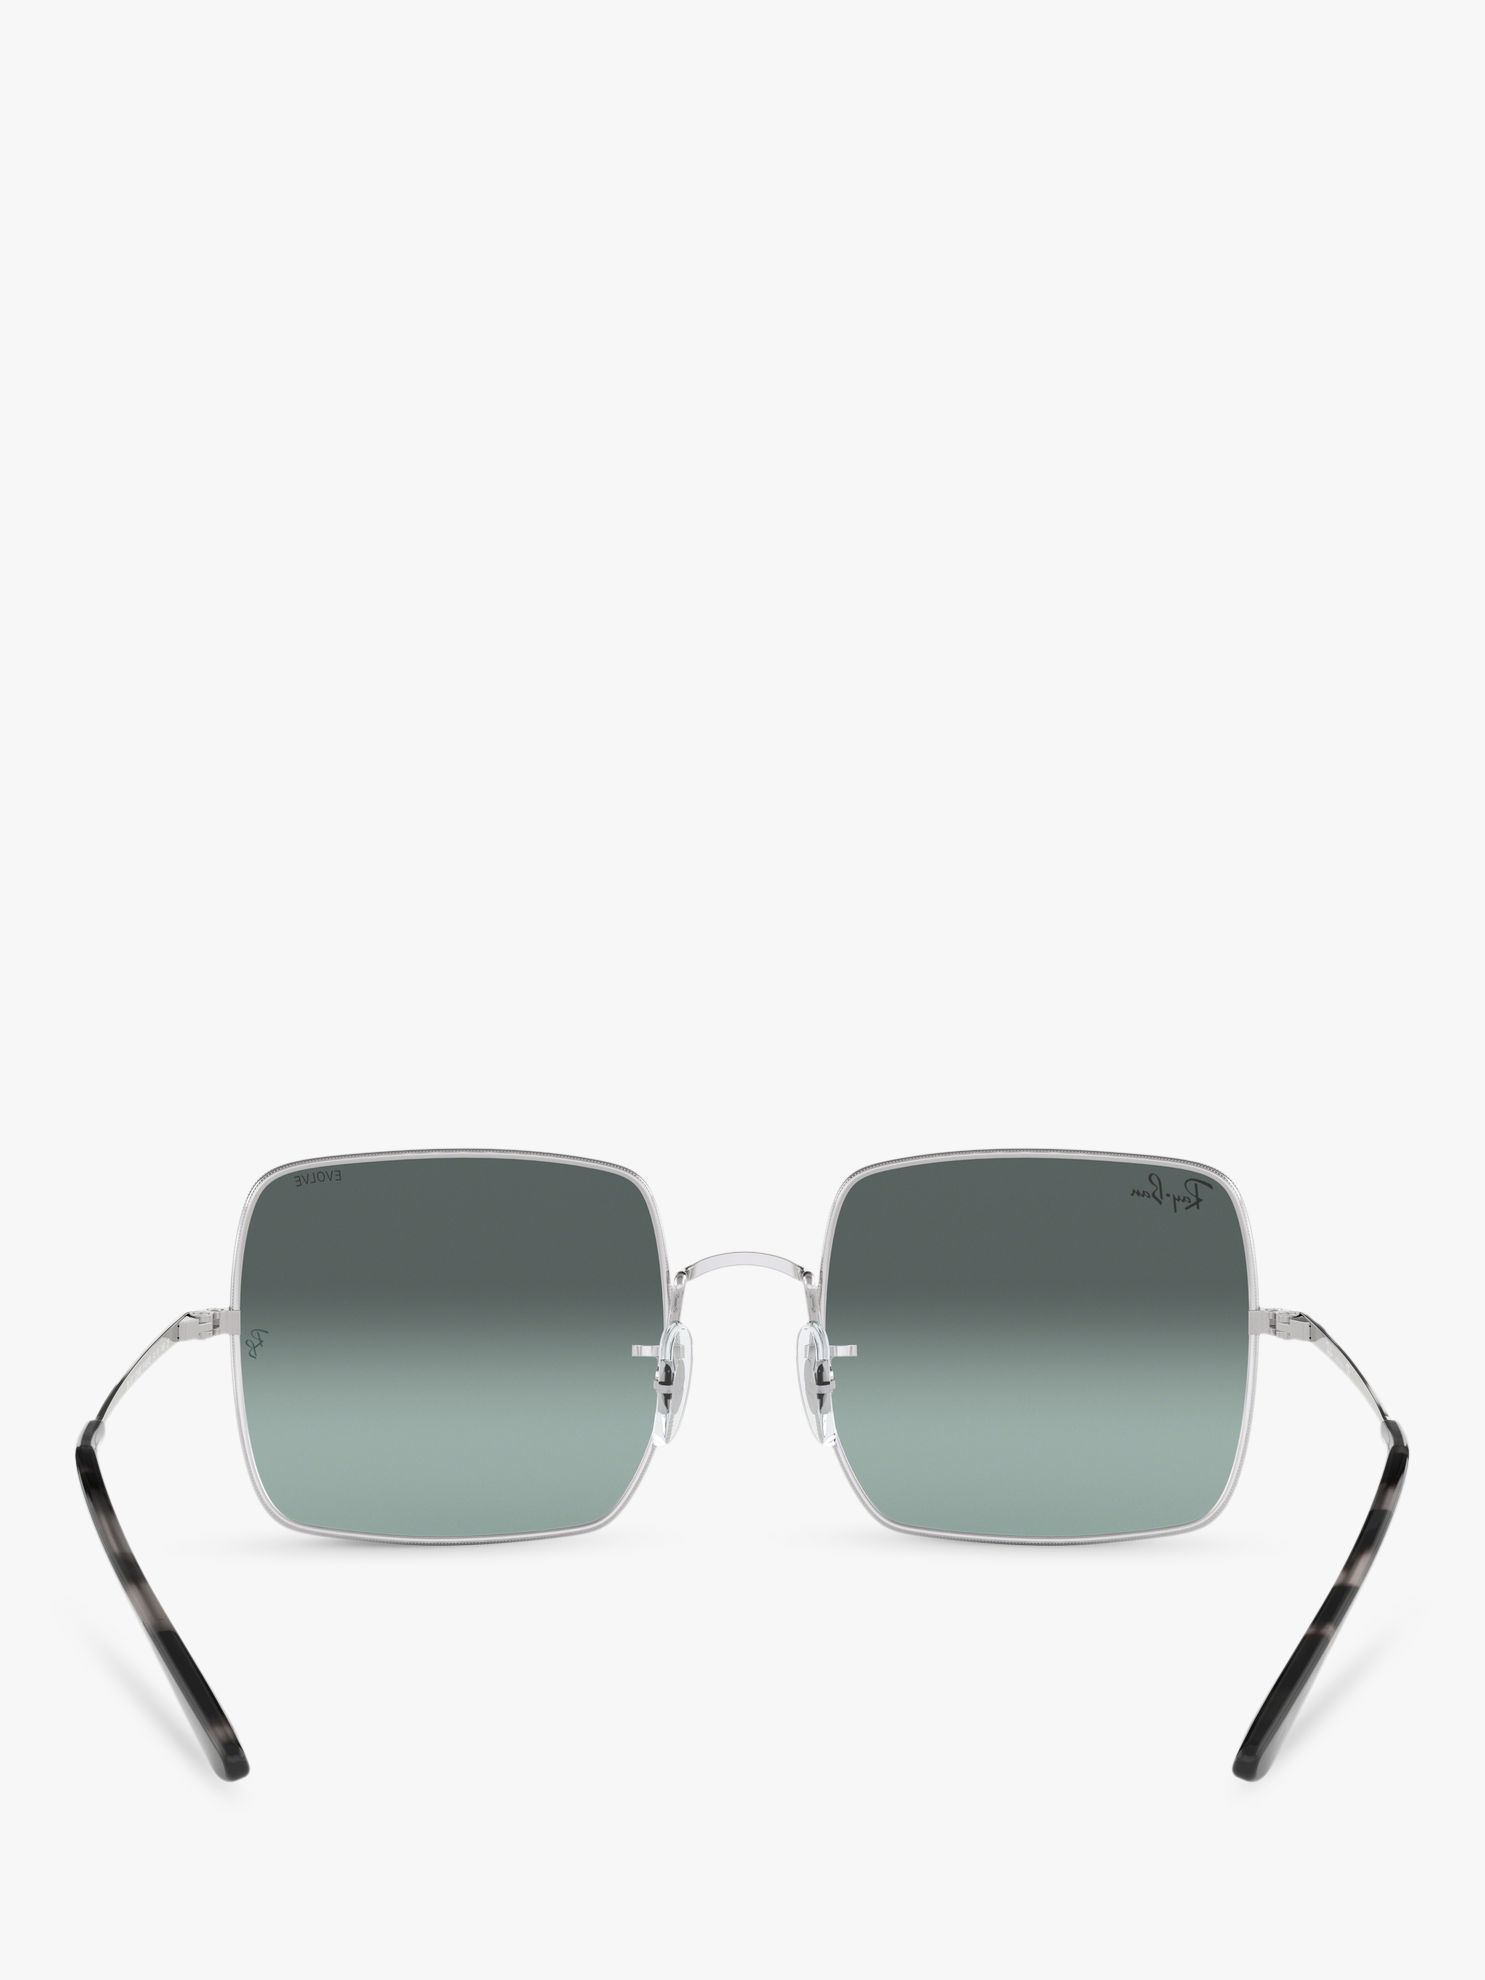 Ray-Ban RB1971 Unisex Square Sunglasses, Silver/Blue Gradient